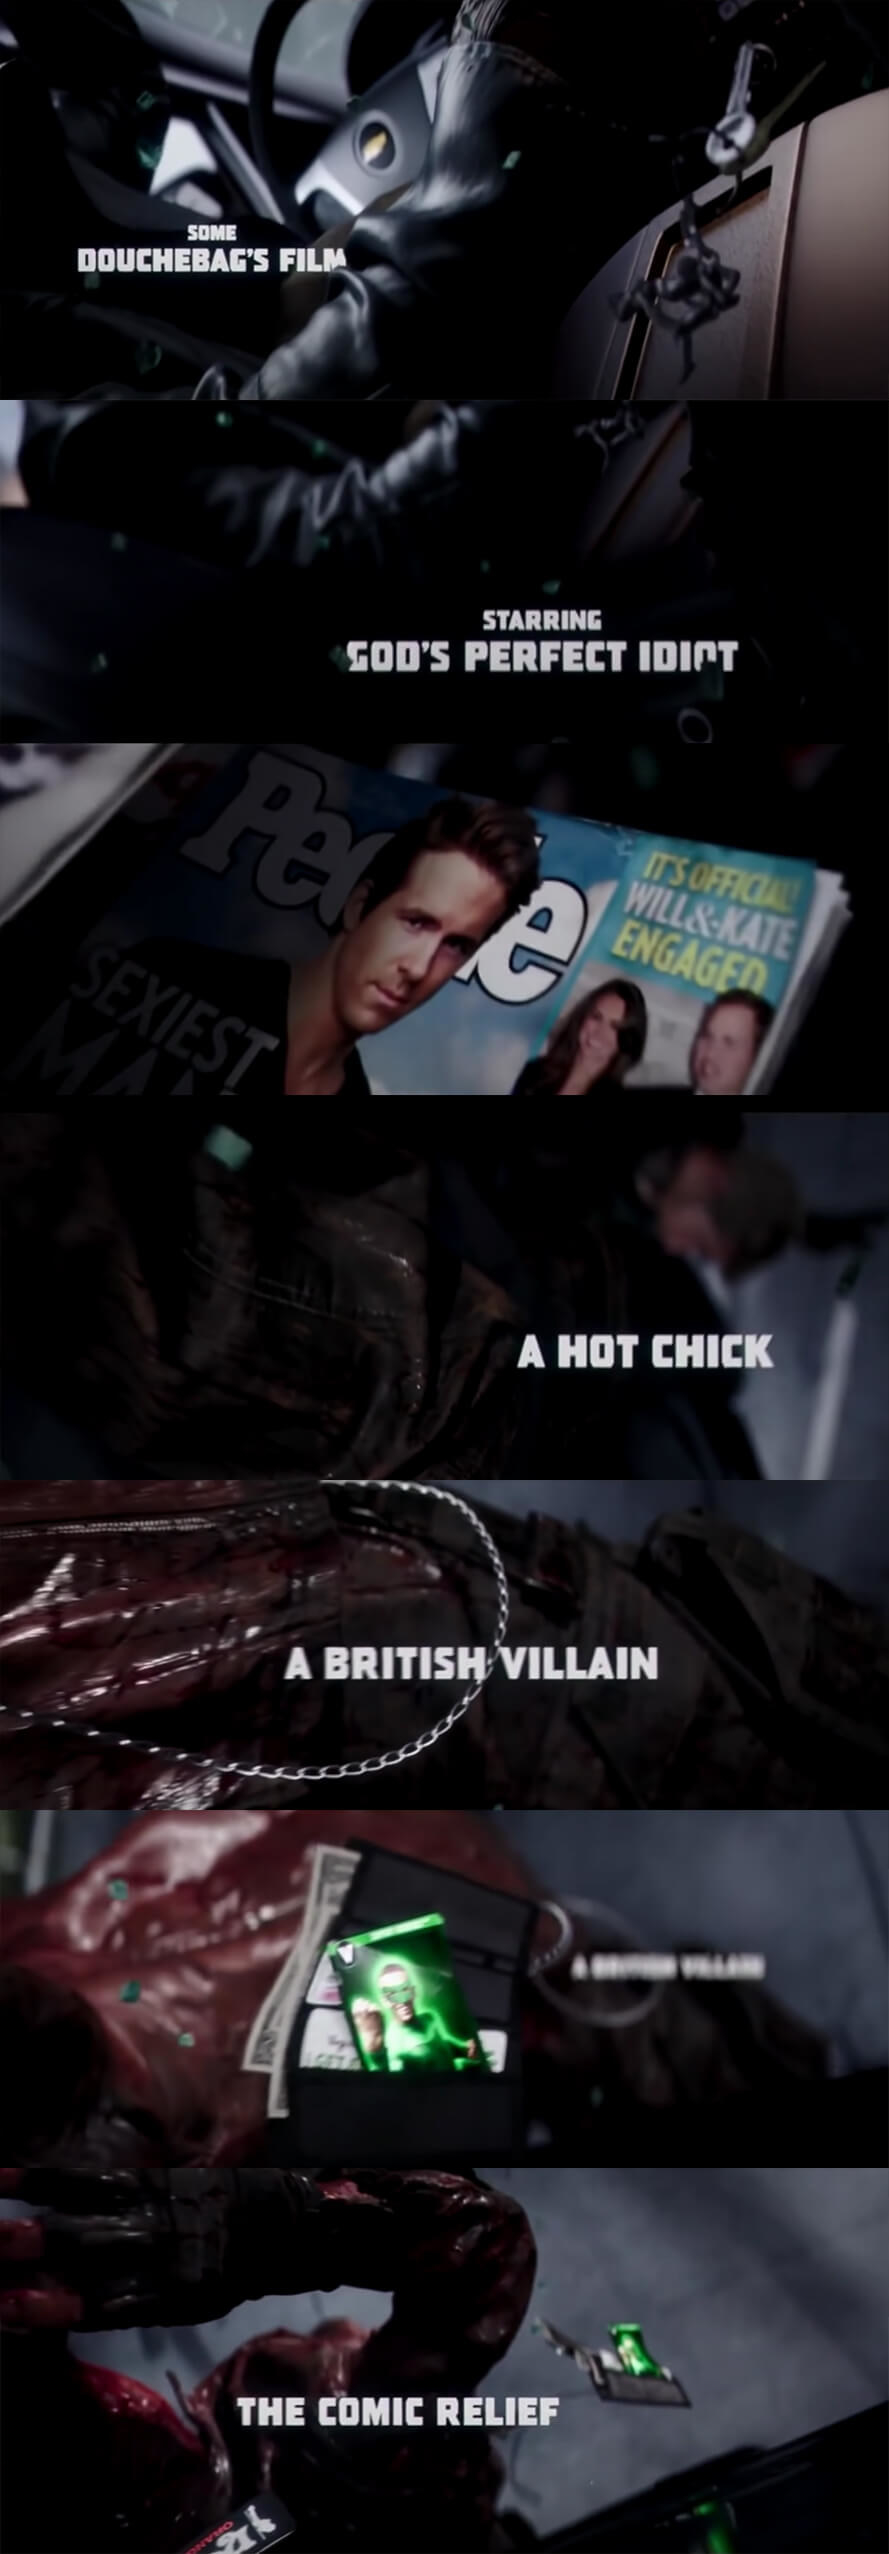 credits naming characters like the comic relief and a british villain and god&#x27;s perfect idiot (with a people magazine cover of ryan reynolds) as we go through an action scene in slo-mo and see someone&#x27;s purse with a Green Lantern card in it